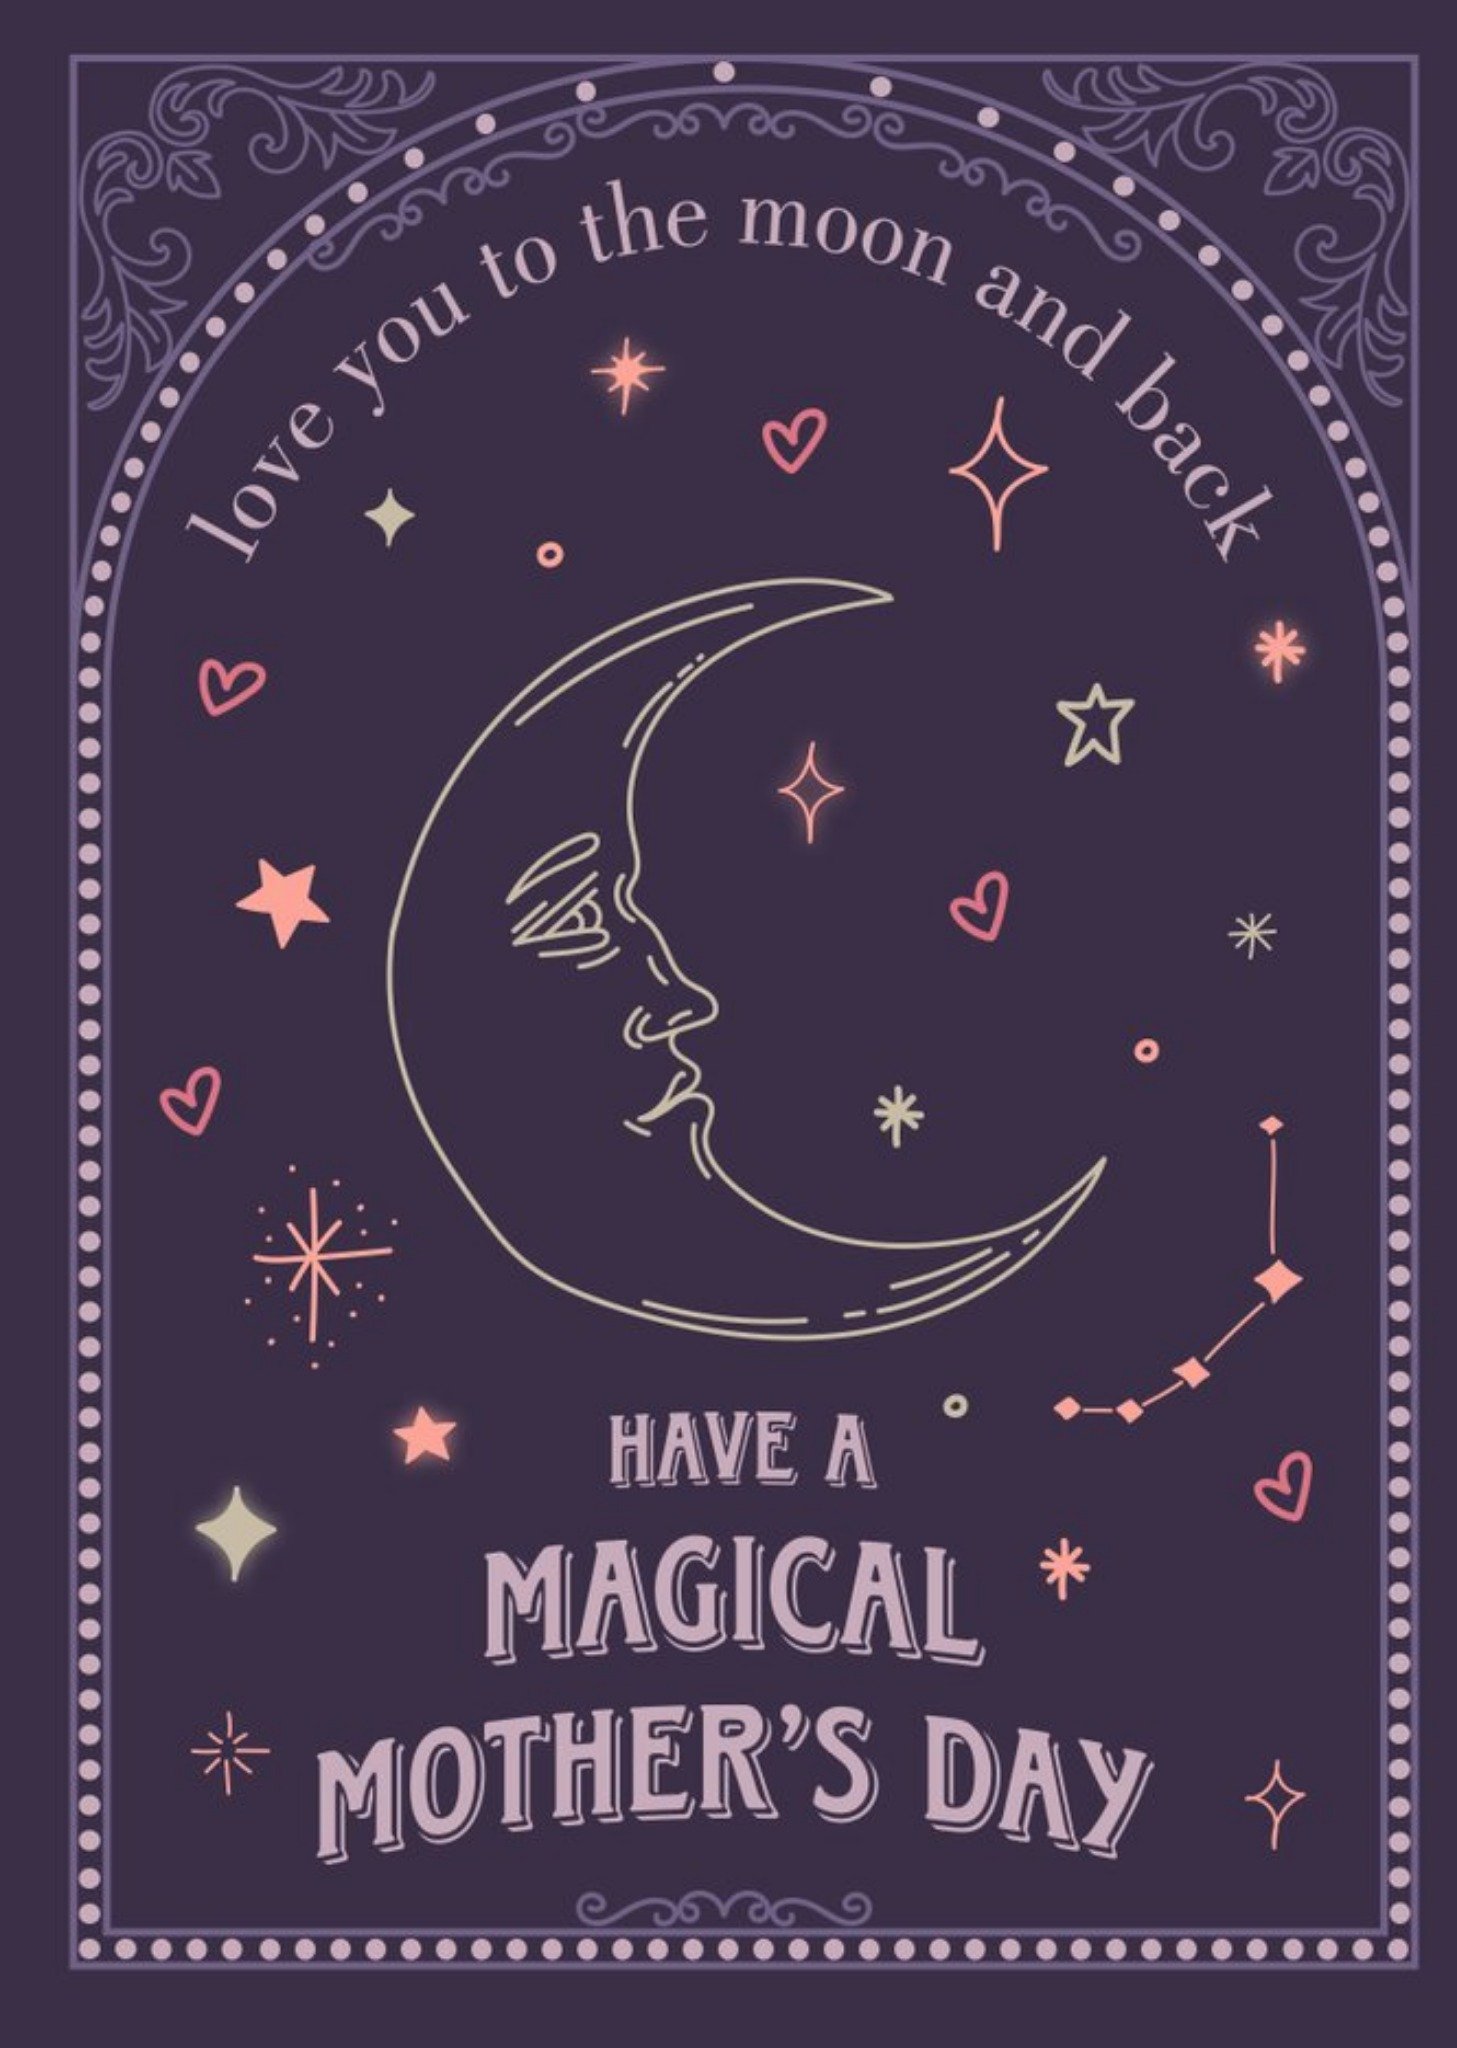 Moonchild Mystical Love You To The Moon And Back Astrology Mother's Day Card Ecard